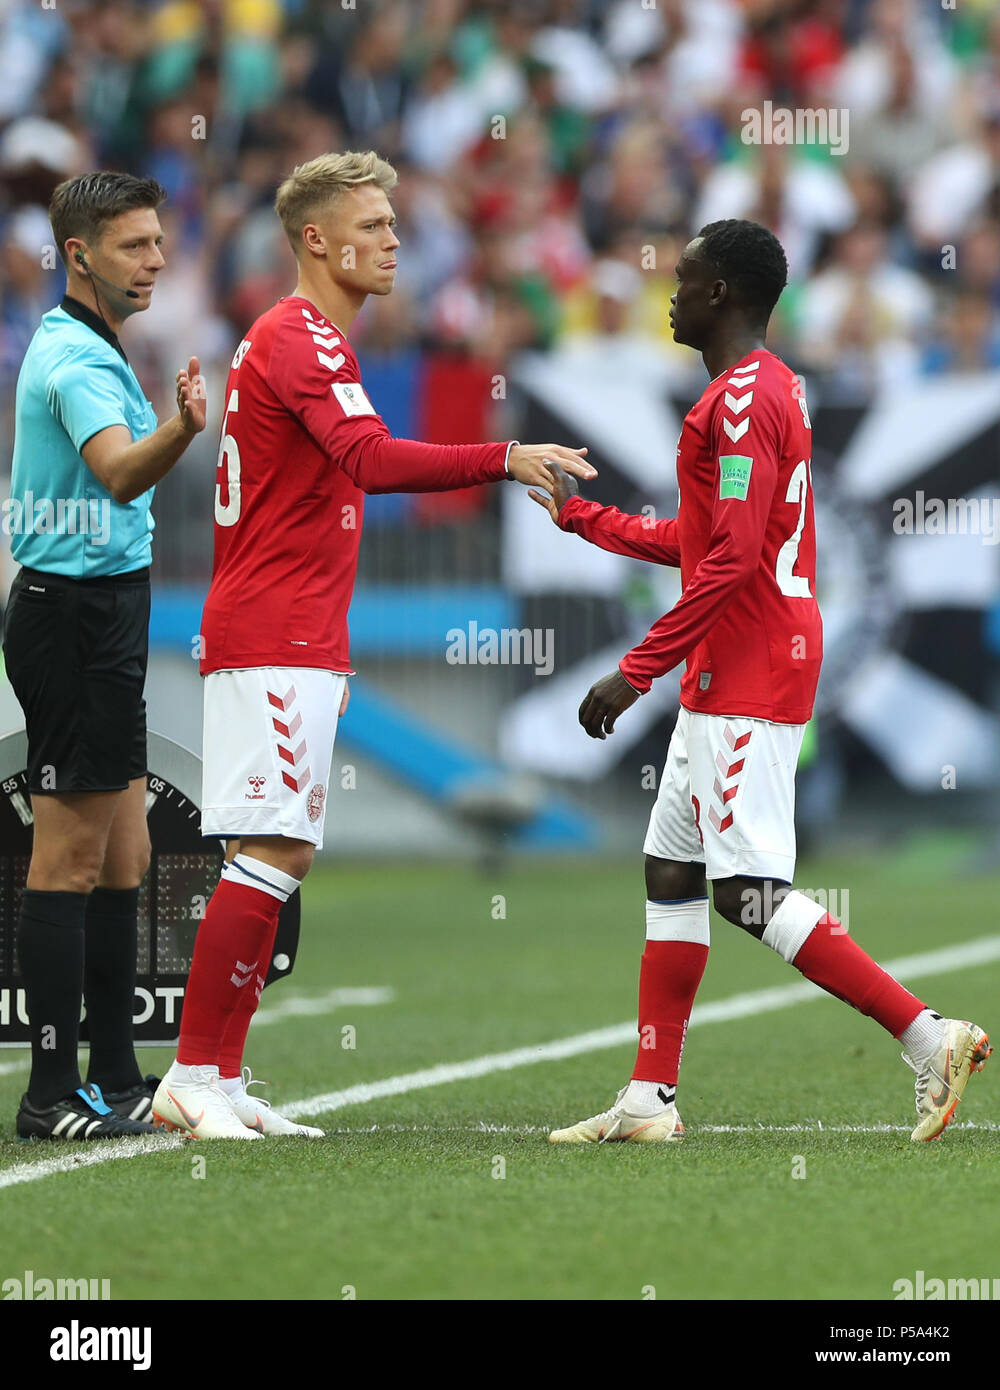 Moscow, Russia. 26th June, 2018. Denmark's Pione Sisto (R) leaves the pitch after being substituted off by Viktor Fischer during the 2018 FIFA World Cup Group C match between Denmark and France in Moscow, Russia, June 26, 2018. Credit: Xu Zijian/Xinhua/Alamy Live News Stock Photo